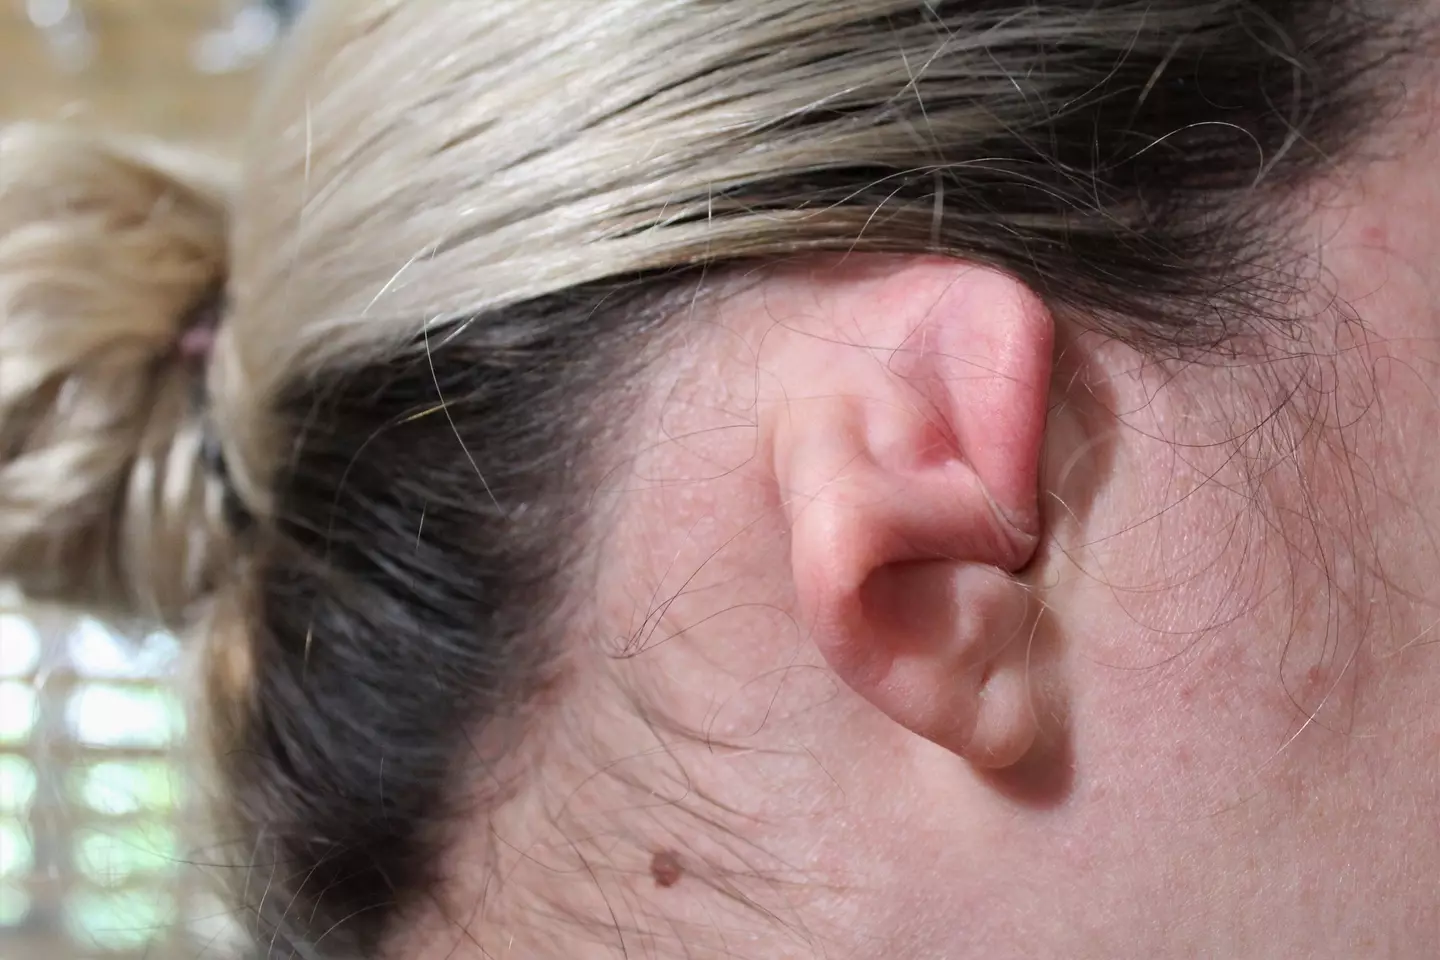 Microtia causes the external part of the ear to be tiny (stock image).